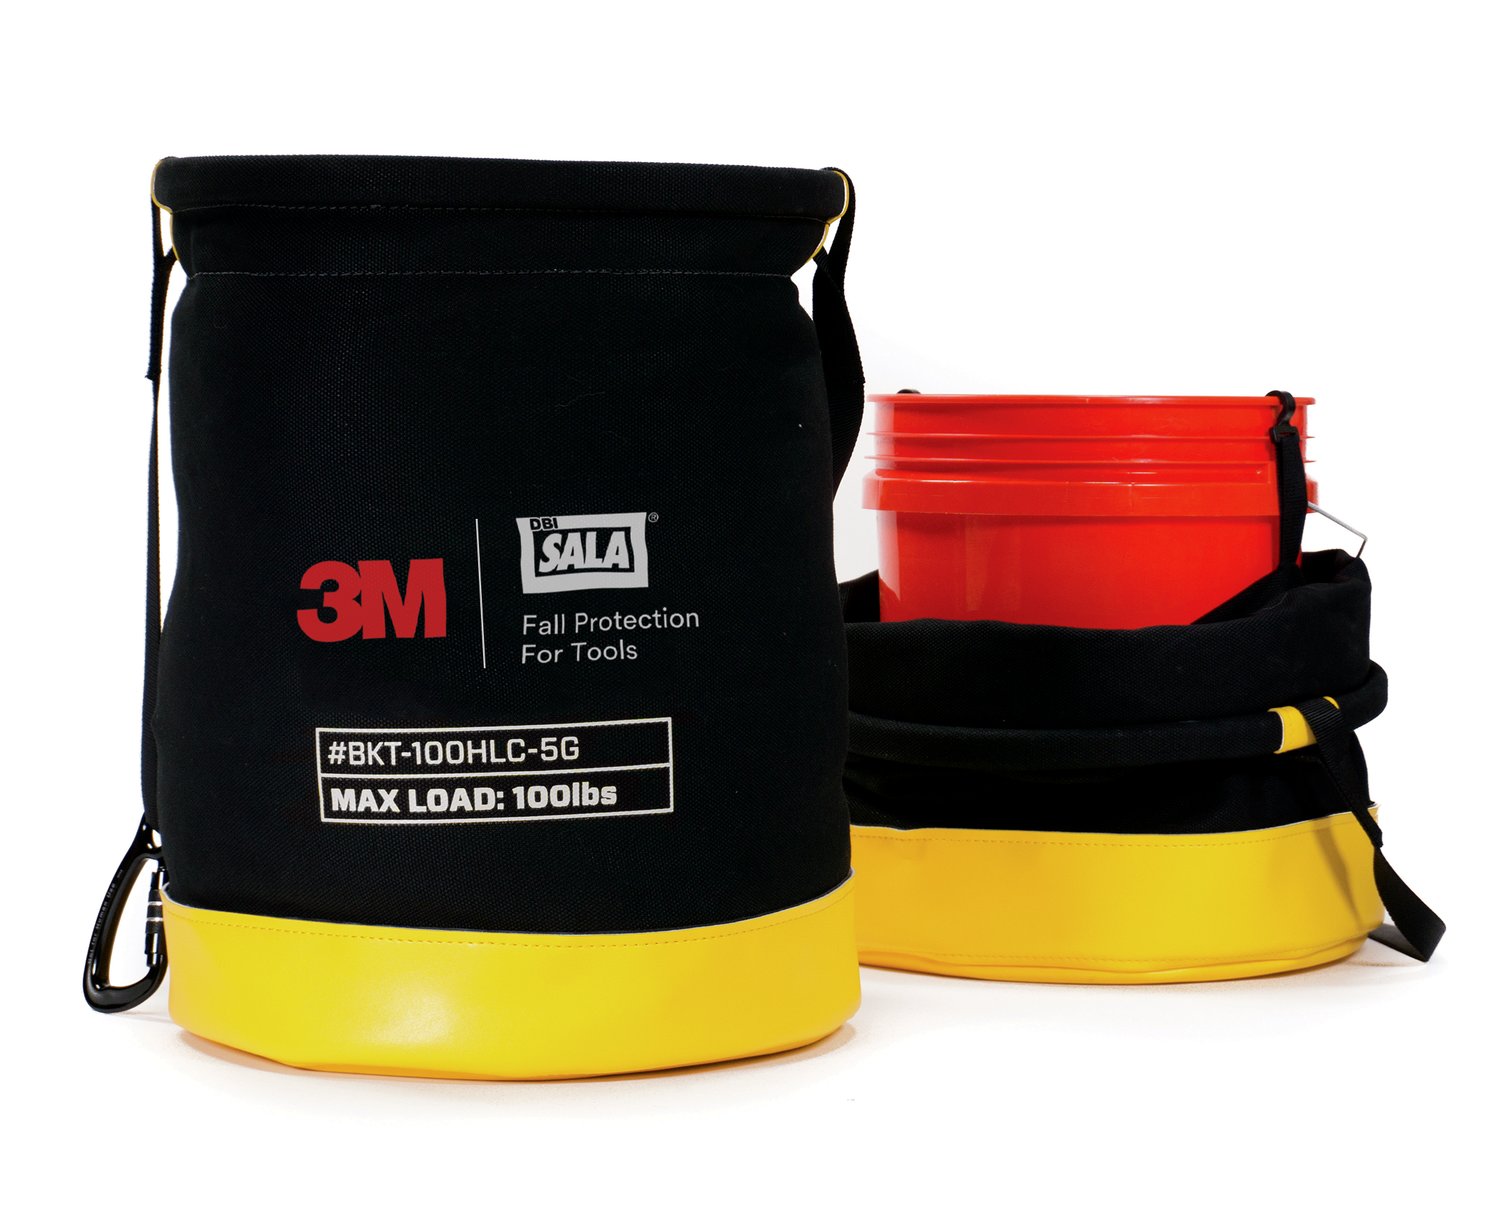 7100237394 - 3M Spill Control 5-Gallon Safe Bucket with Hook and Loop Closure 1500135, 100 lb Capacity, Canvas